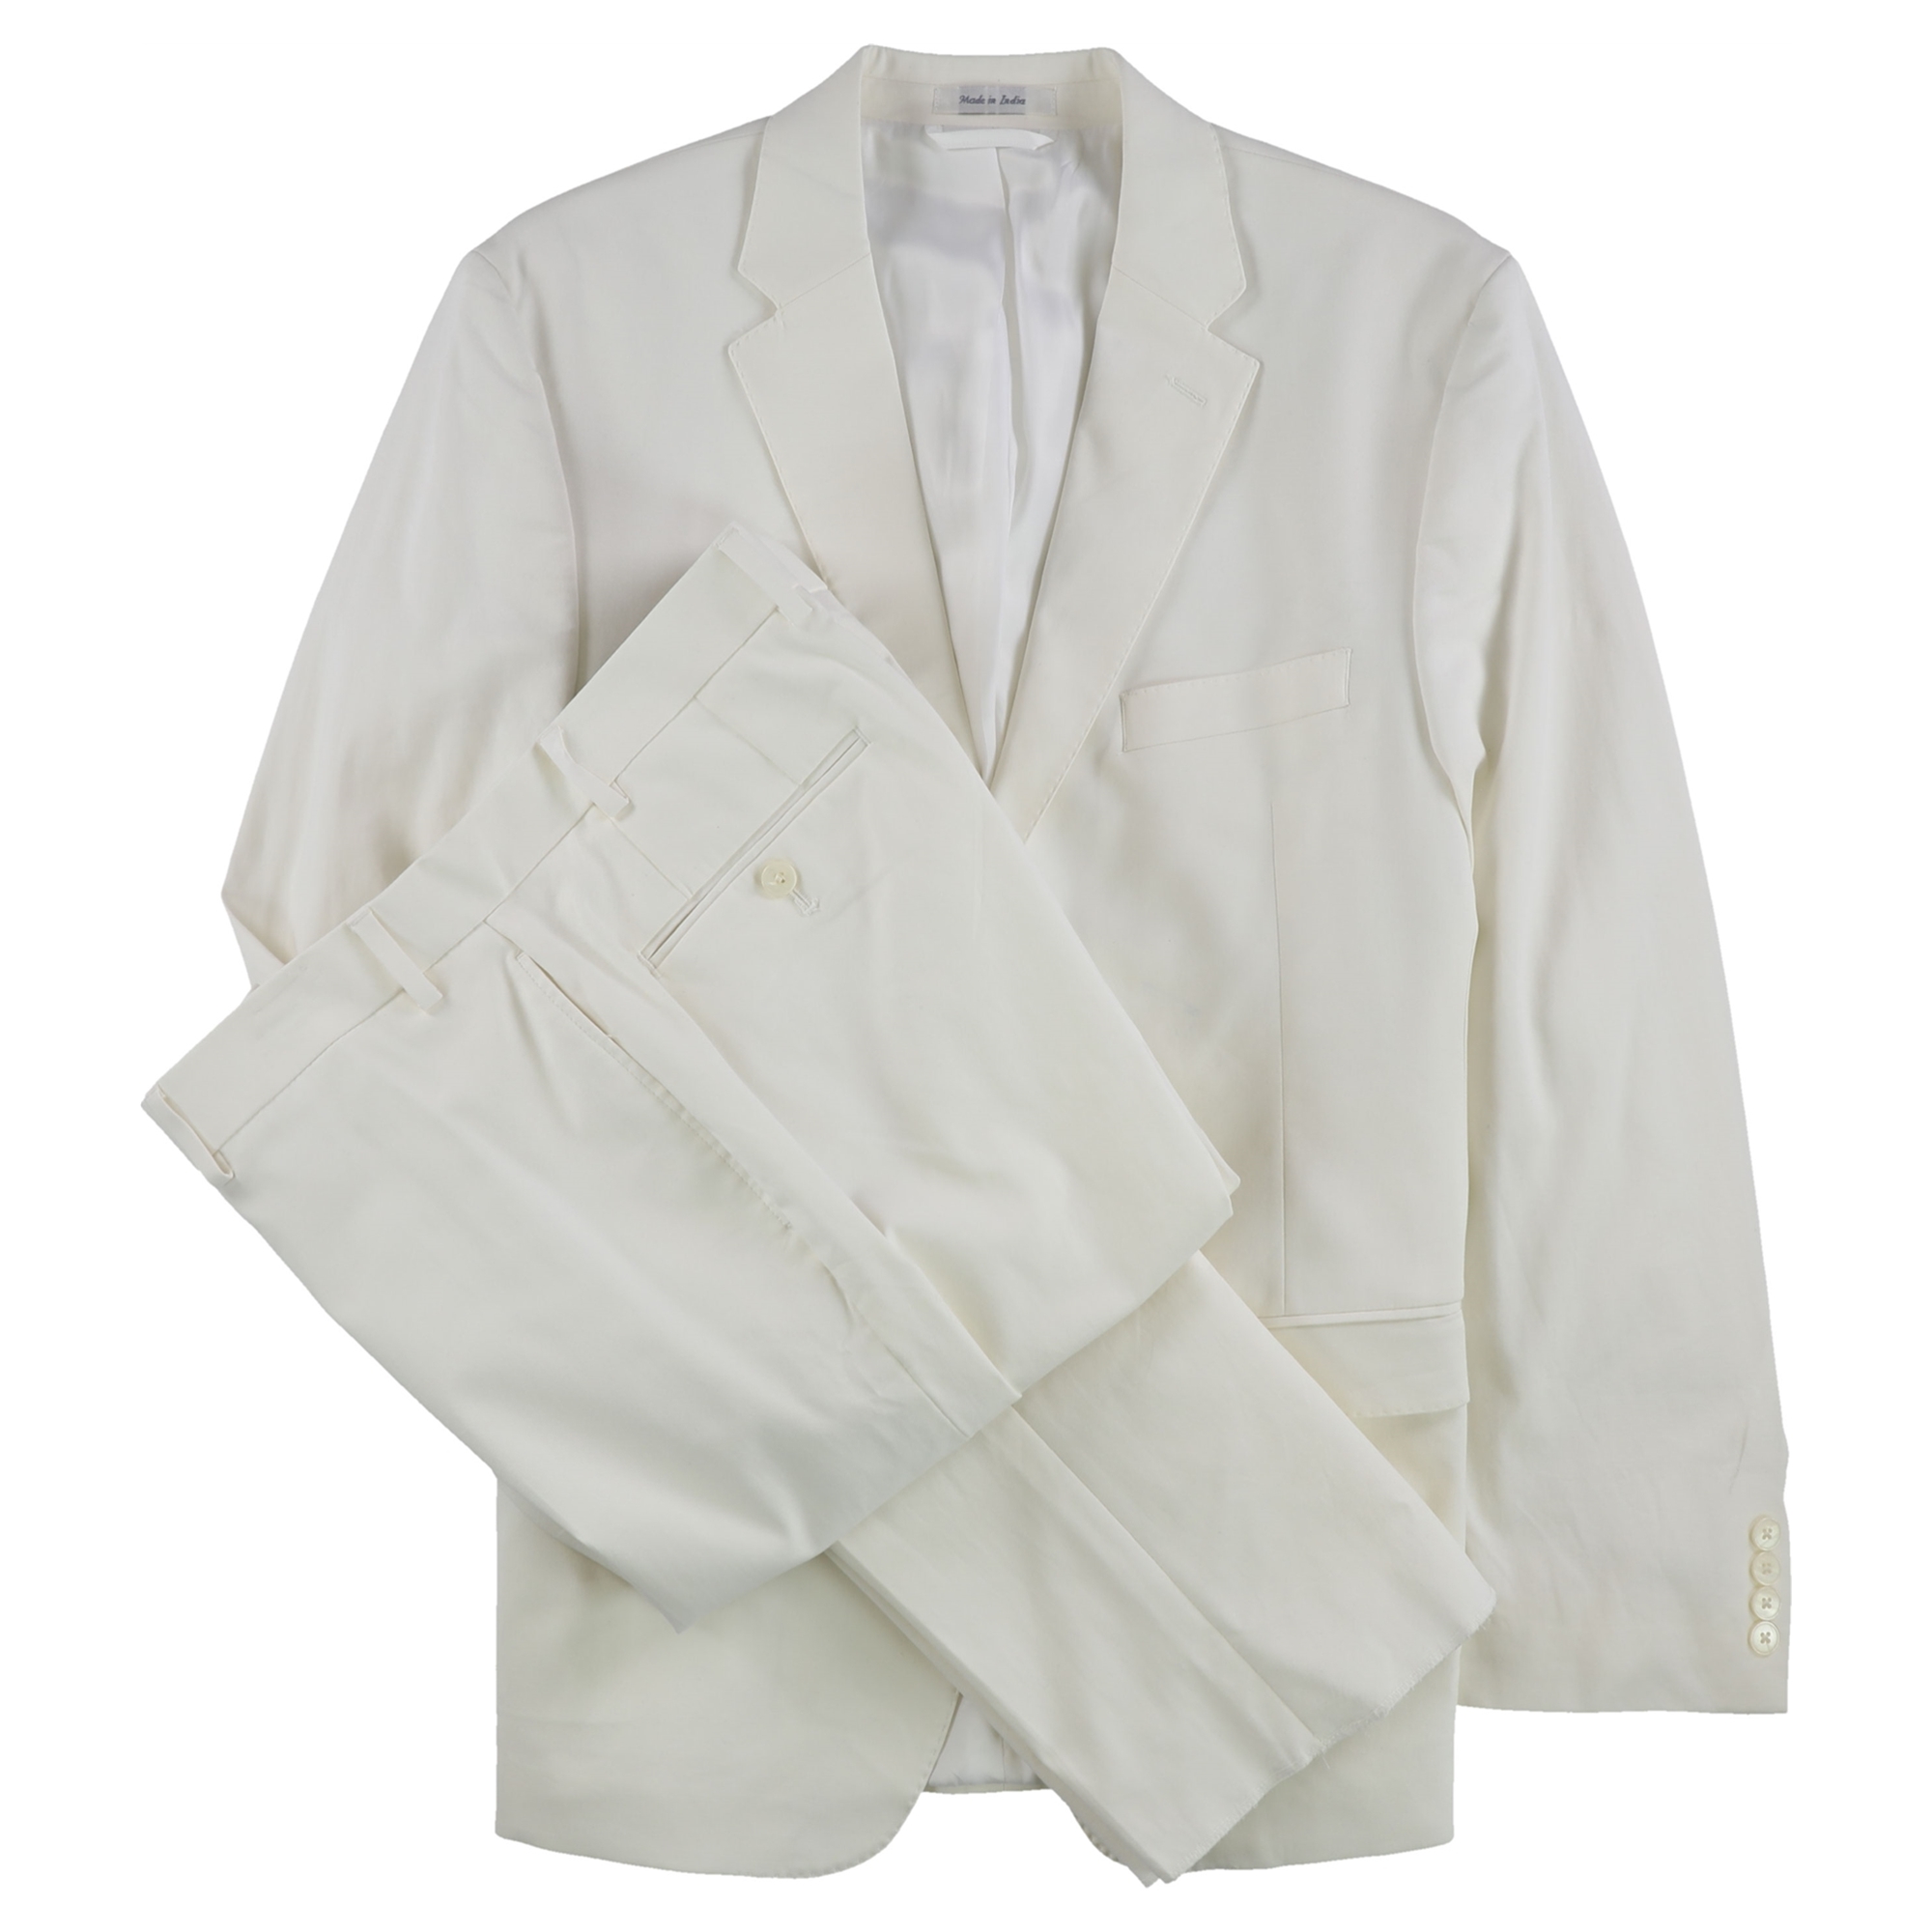 Ralph Lauren Mens Ultraflex Two Button Formal Suit white 43/Unfinished - image 1 of 2